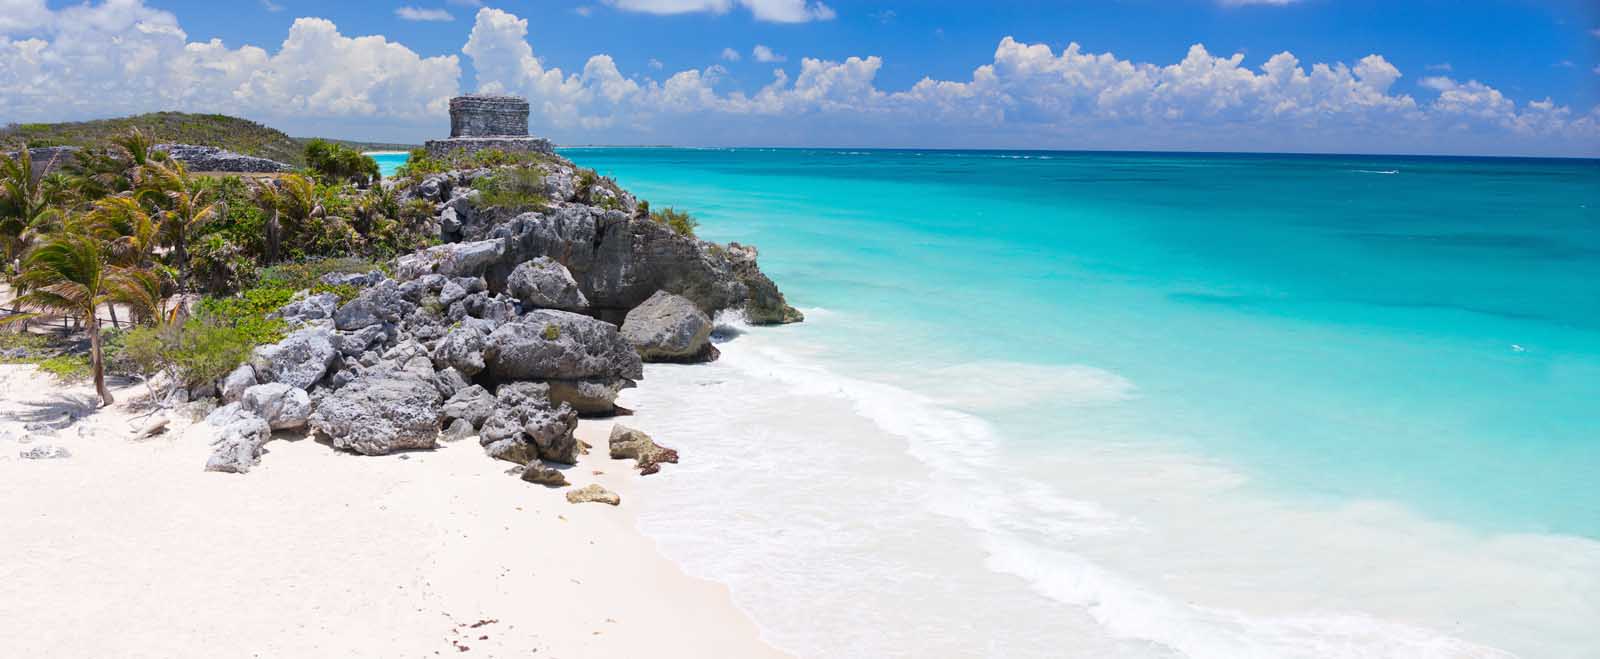 Places to Visit in Mexico Tulum Ruins